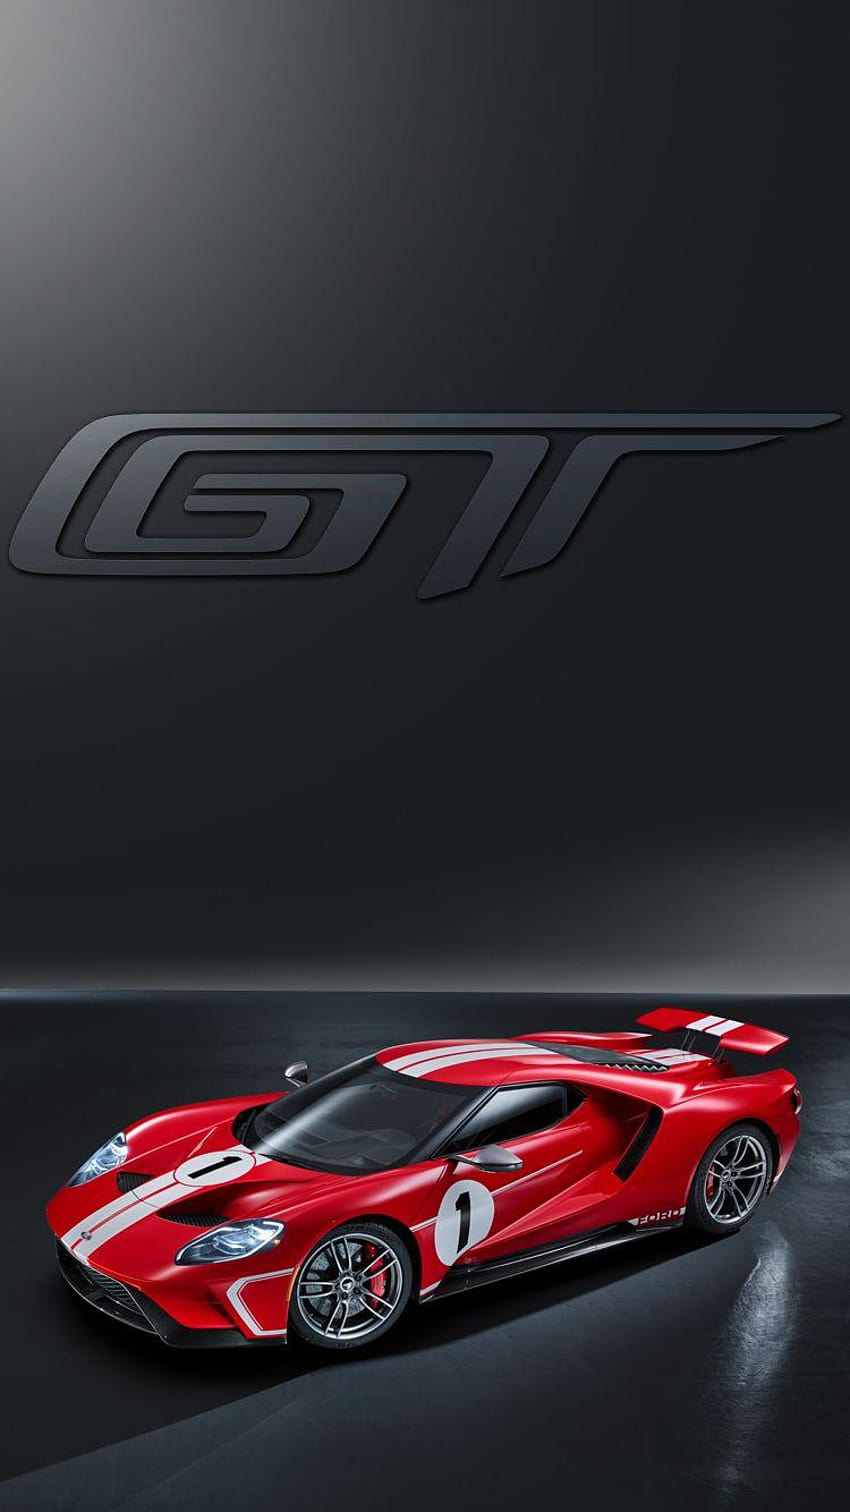 Universal Phone / Backgrounds Red Ford GT Super Car Iphone HD phone wallpaper